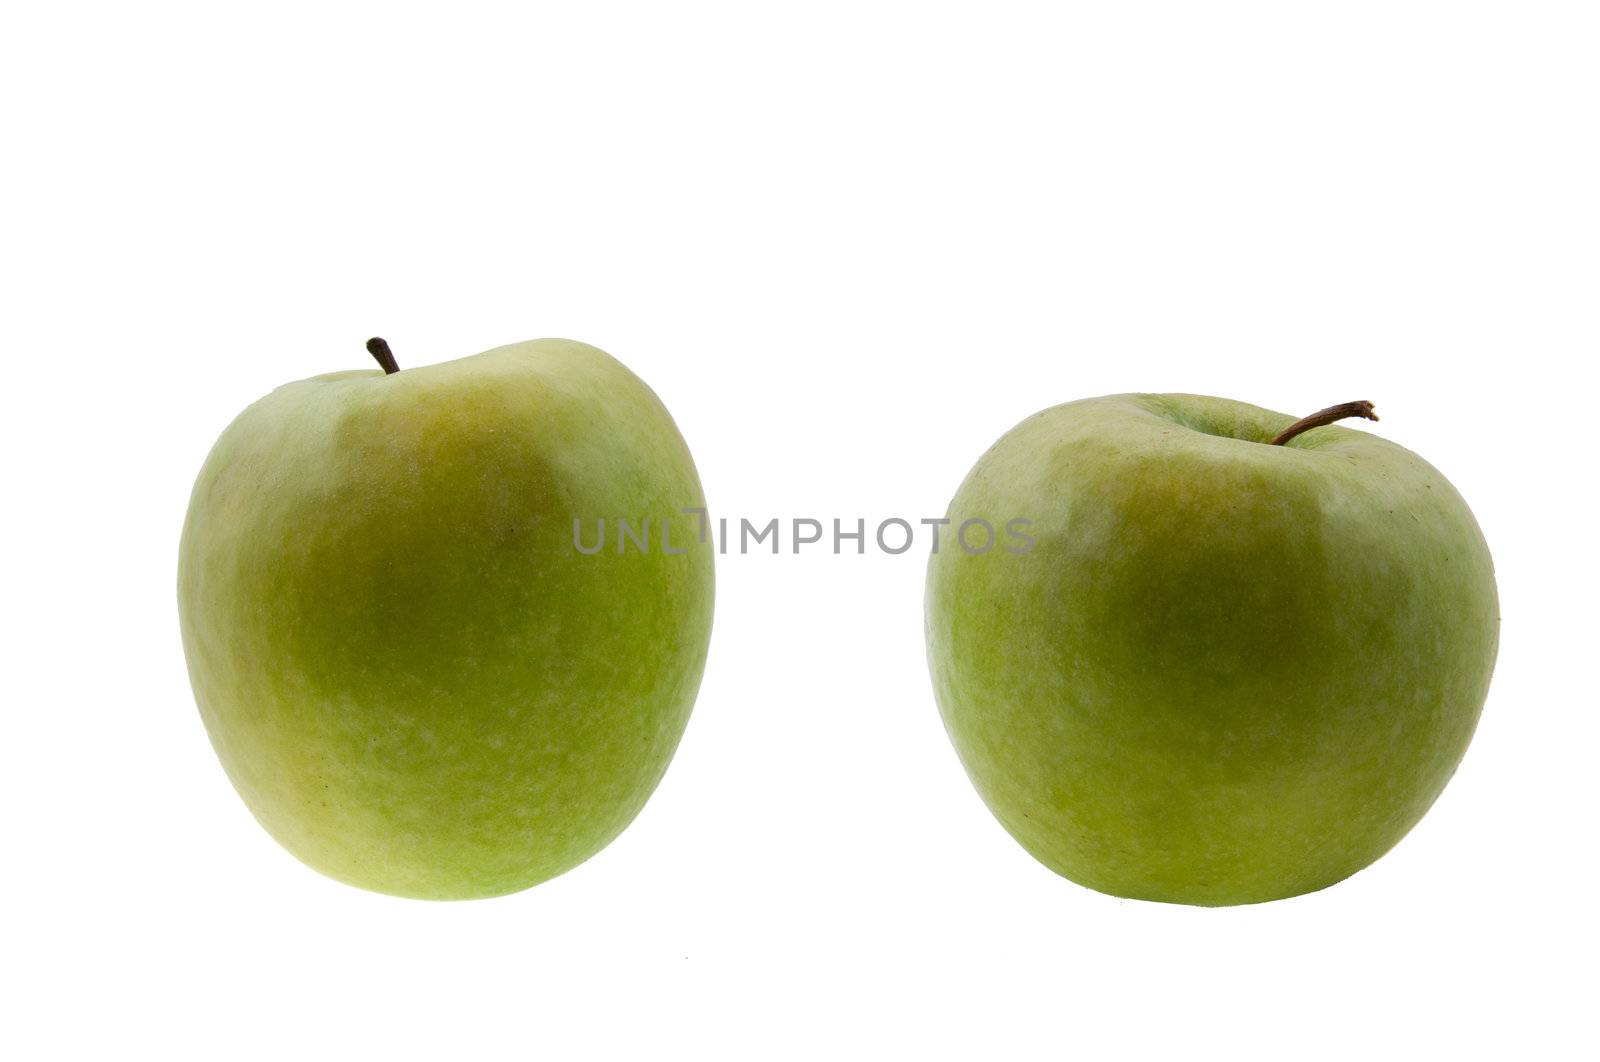 the picture of two green tasty apples